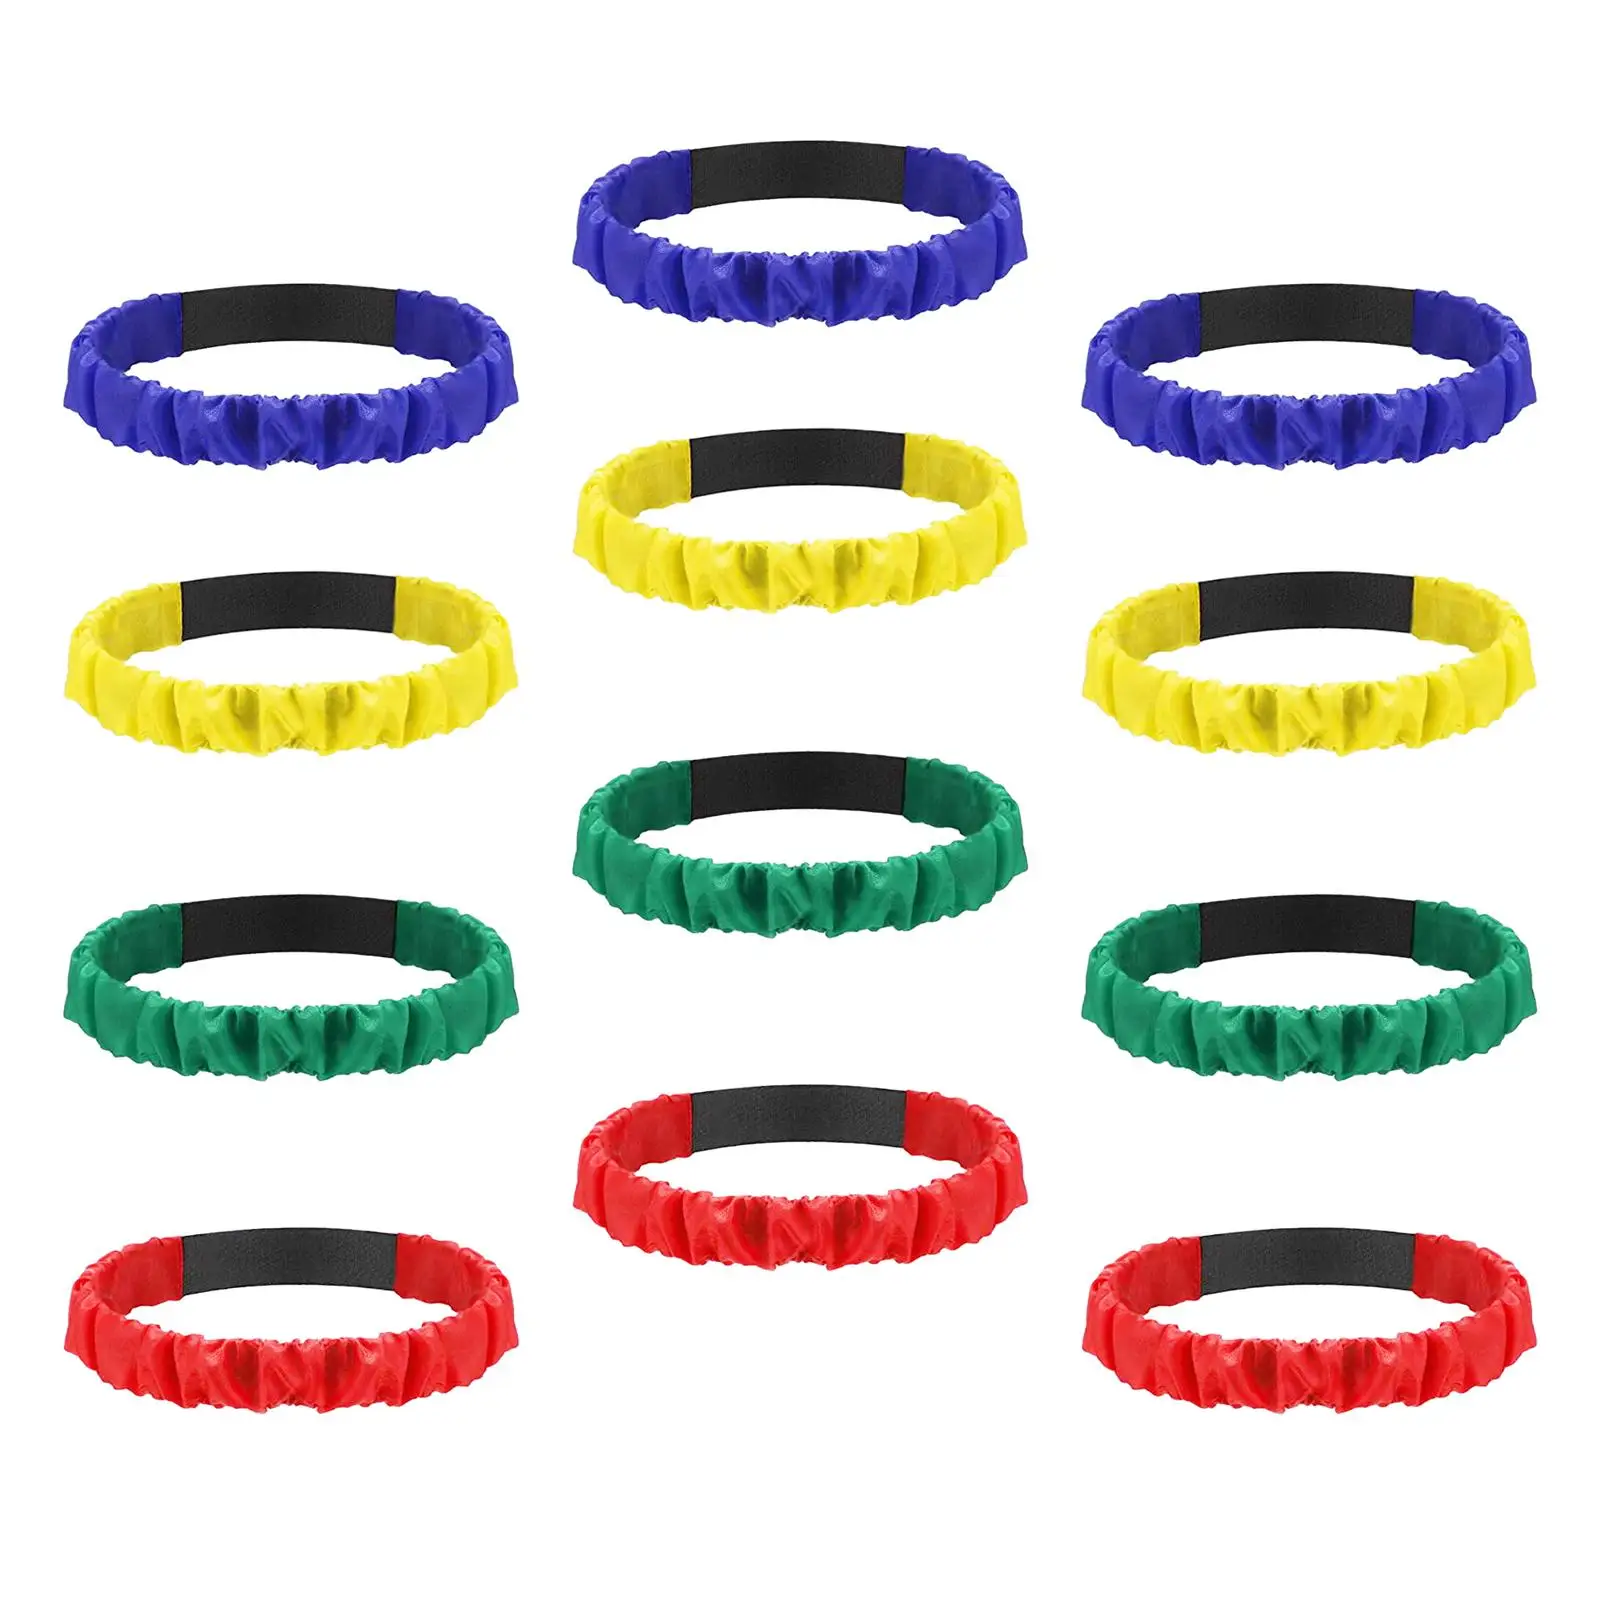 12Pcs Race Legged Band Elastic Tie Strap Kids Party Supplies Field Day Games Adult Teens Legged Race Band 3 Legged Race Band